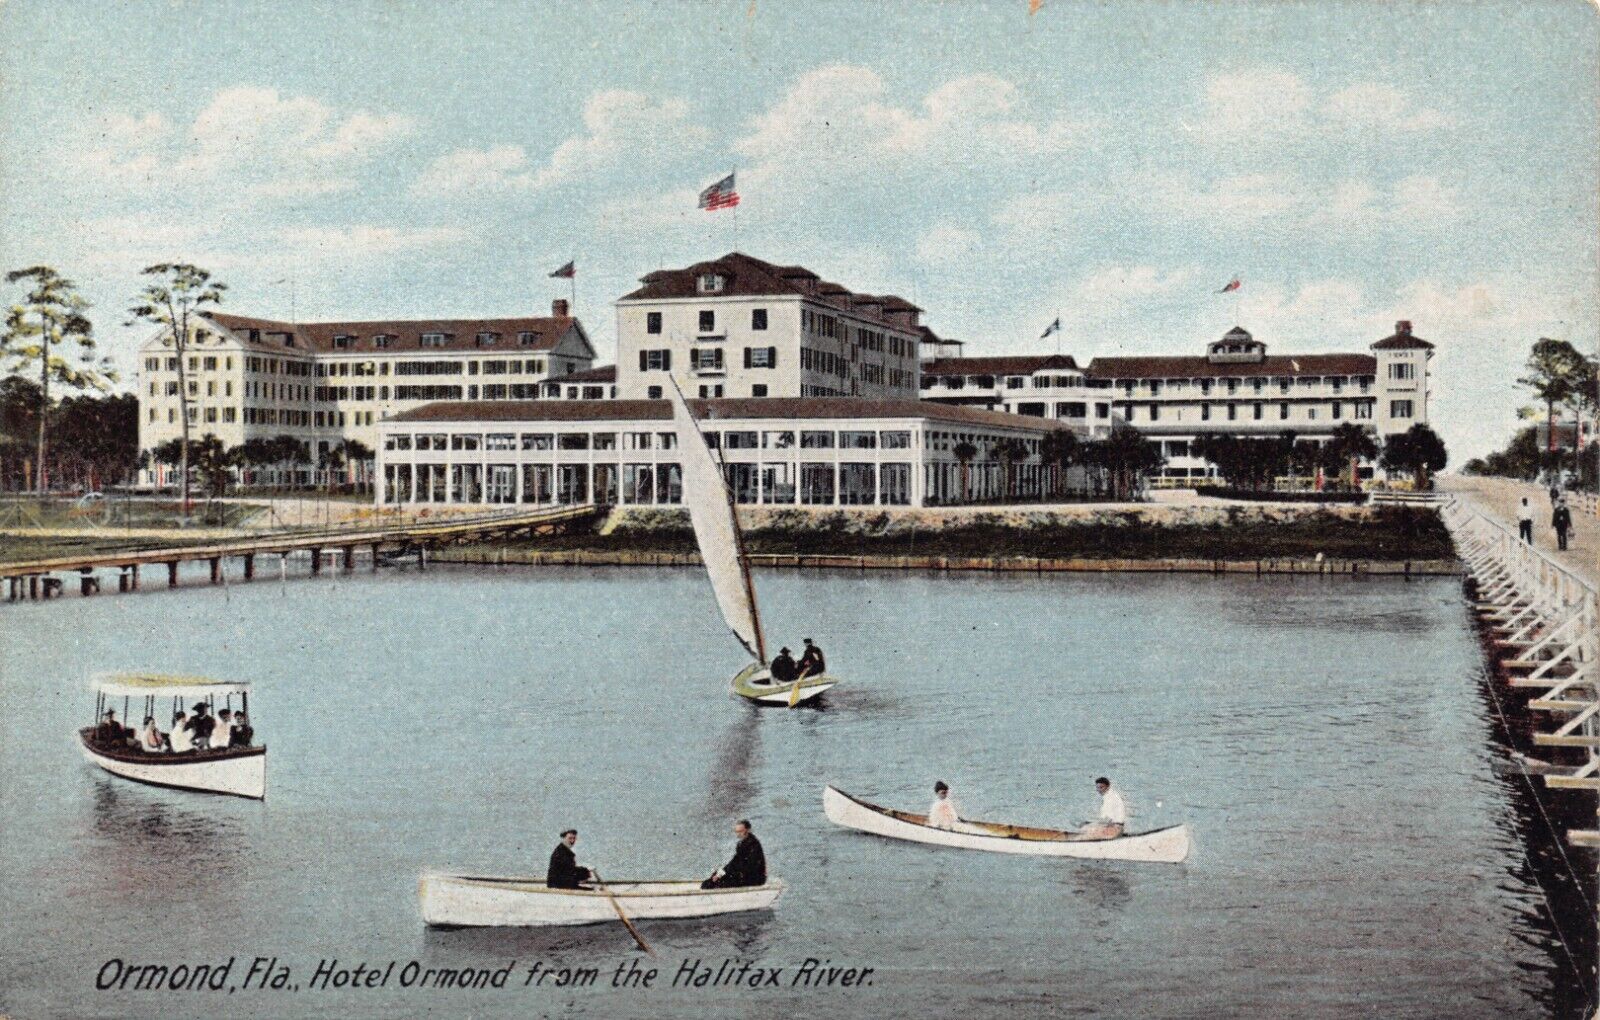 FL~FLORIDA~ORMOND~HOTEL ORMOND FROM THE HALIFAX RIVER~C.1910